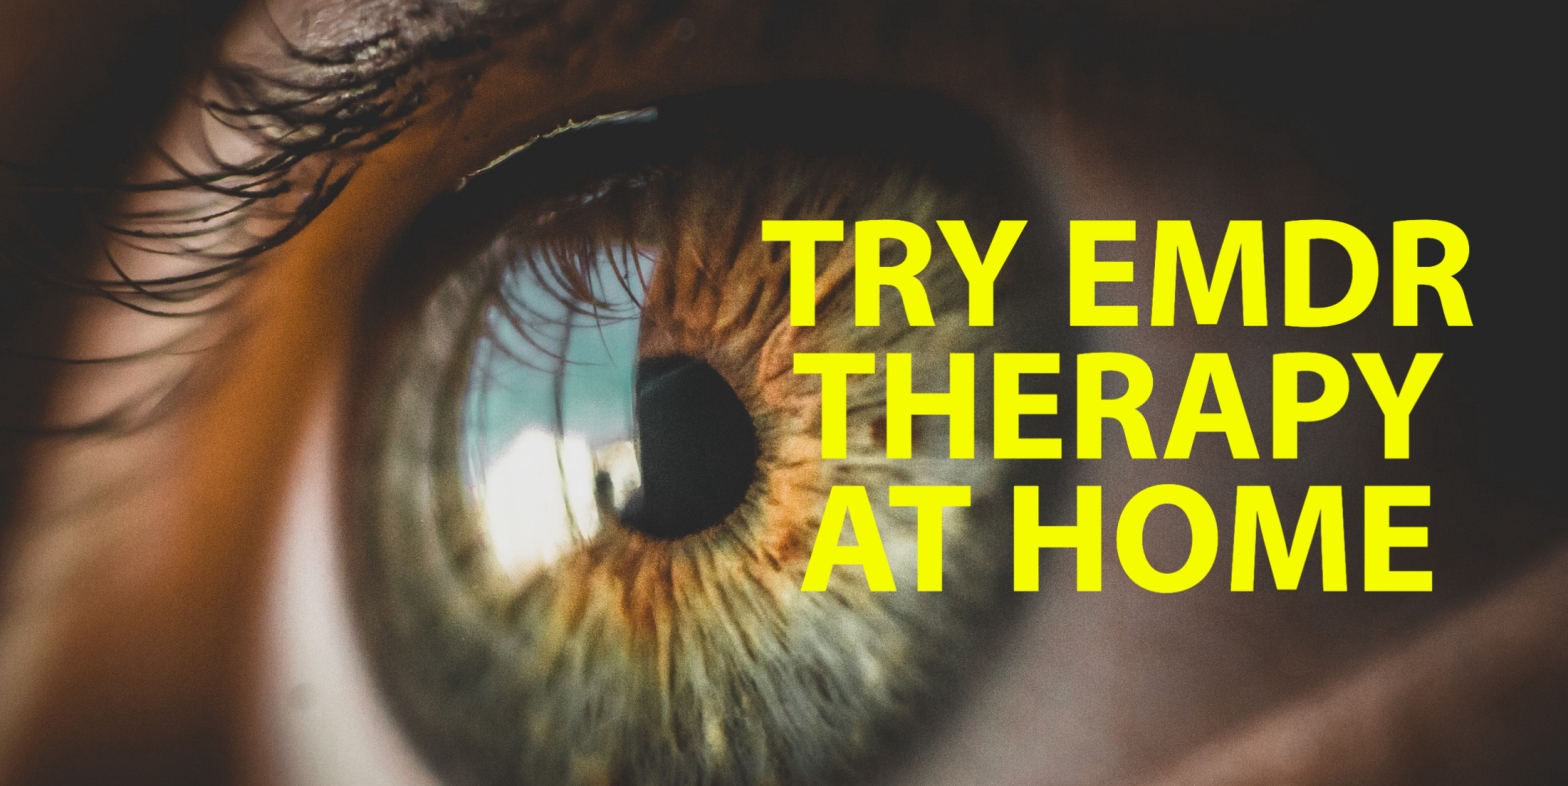 TRY EMDR THERAPY AT HOME